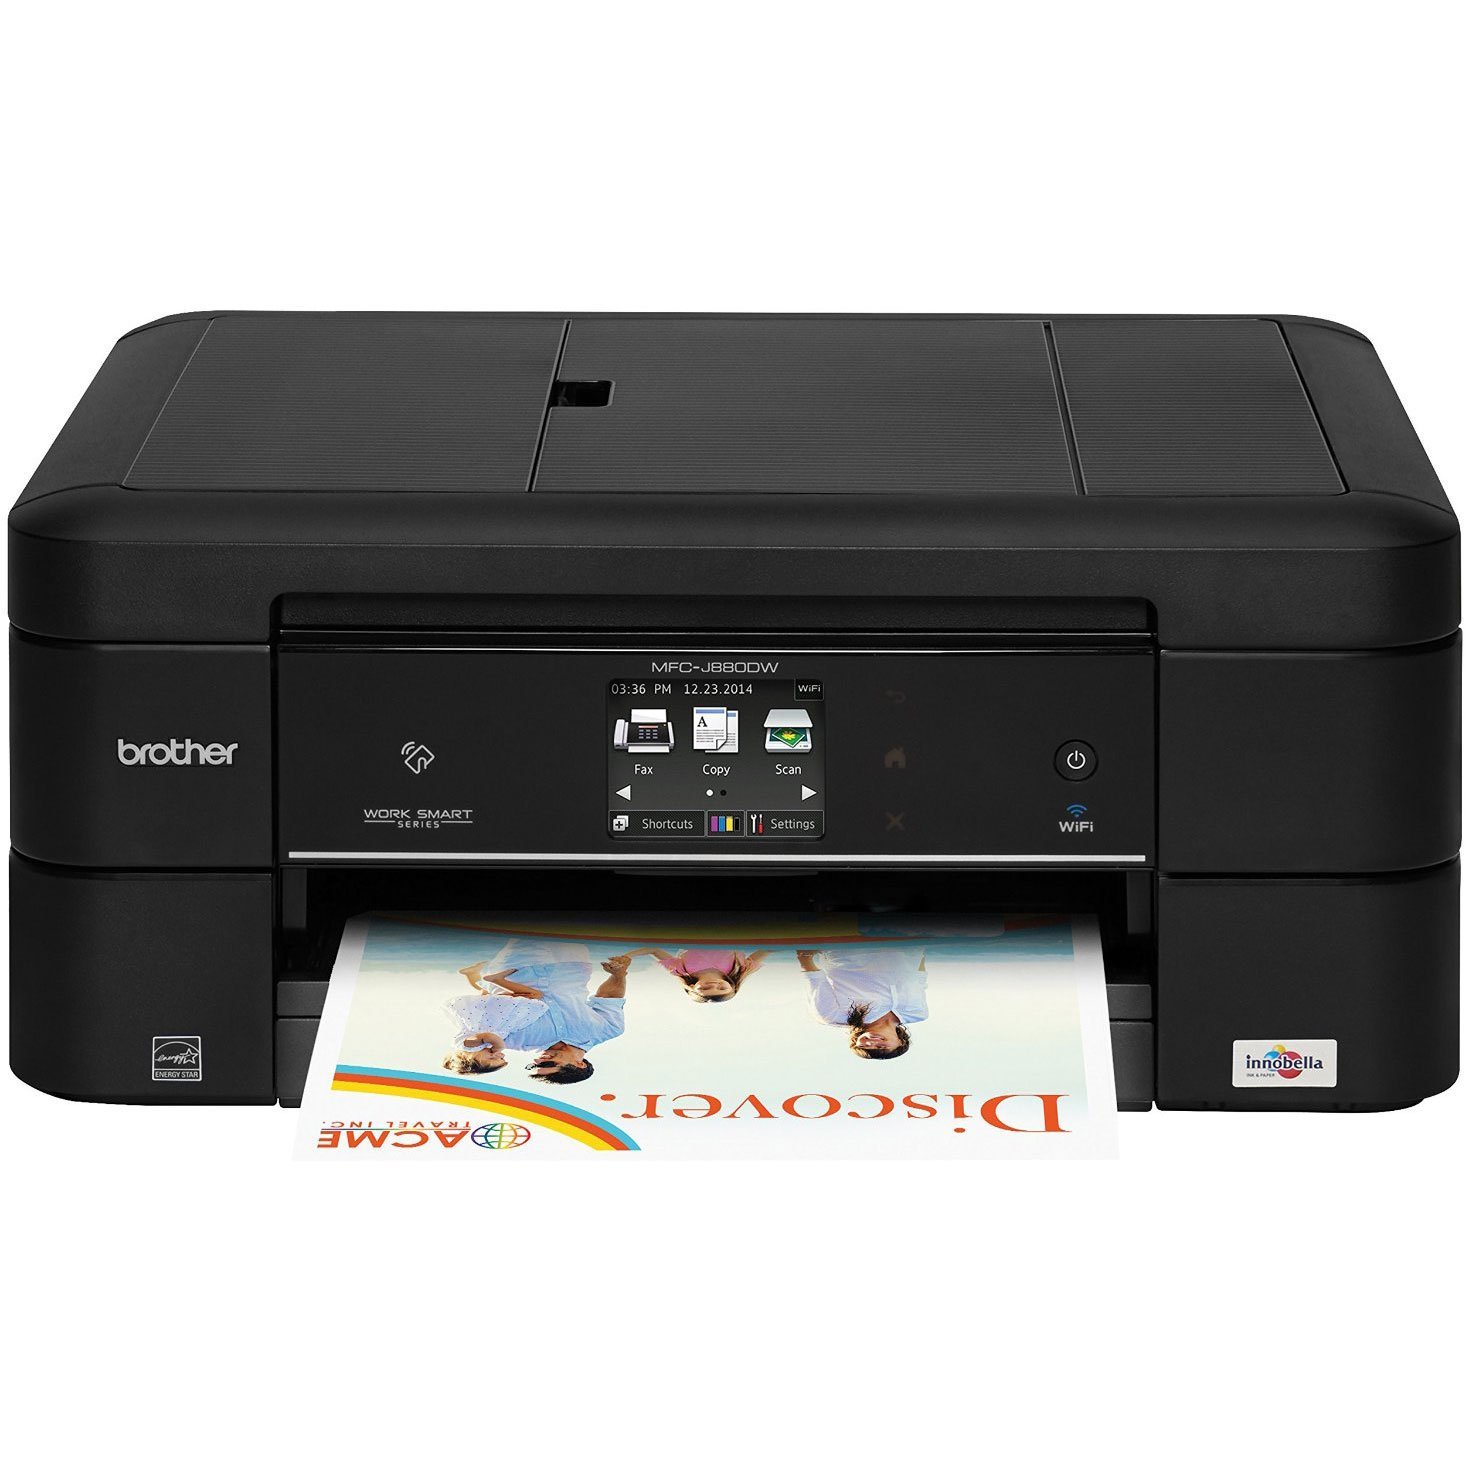 Brother Printer Brother MFC-J885DW Work Smart Inkjet All In One